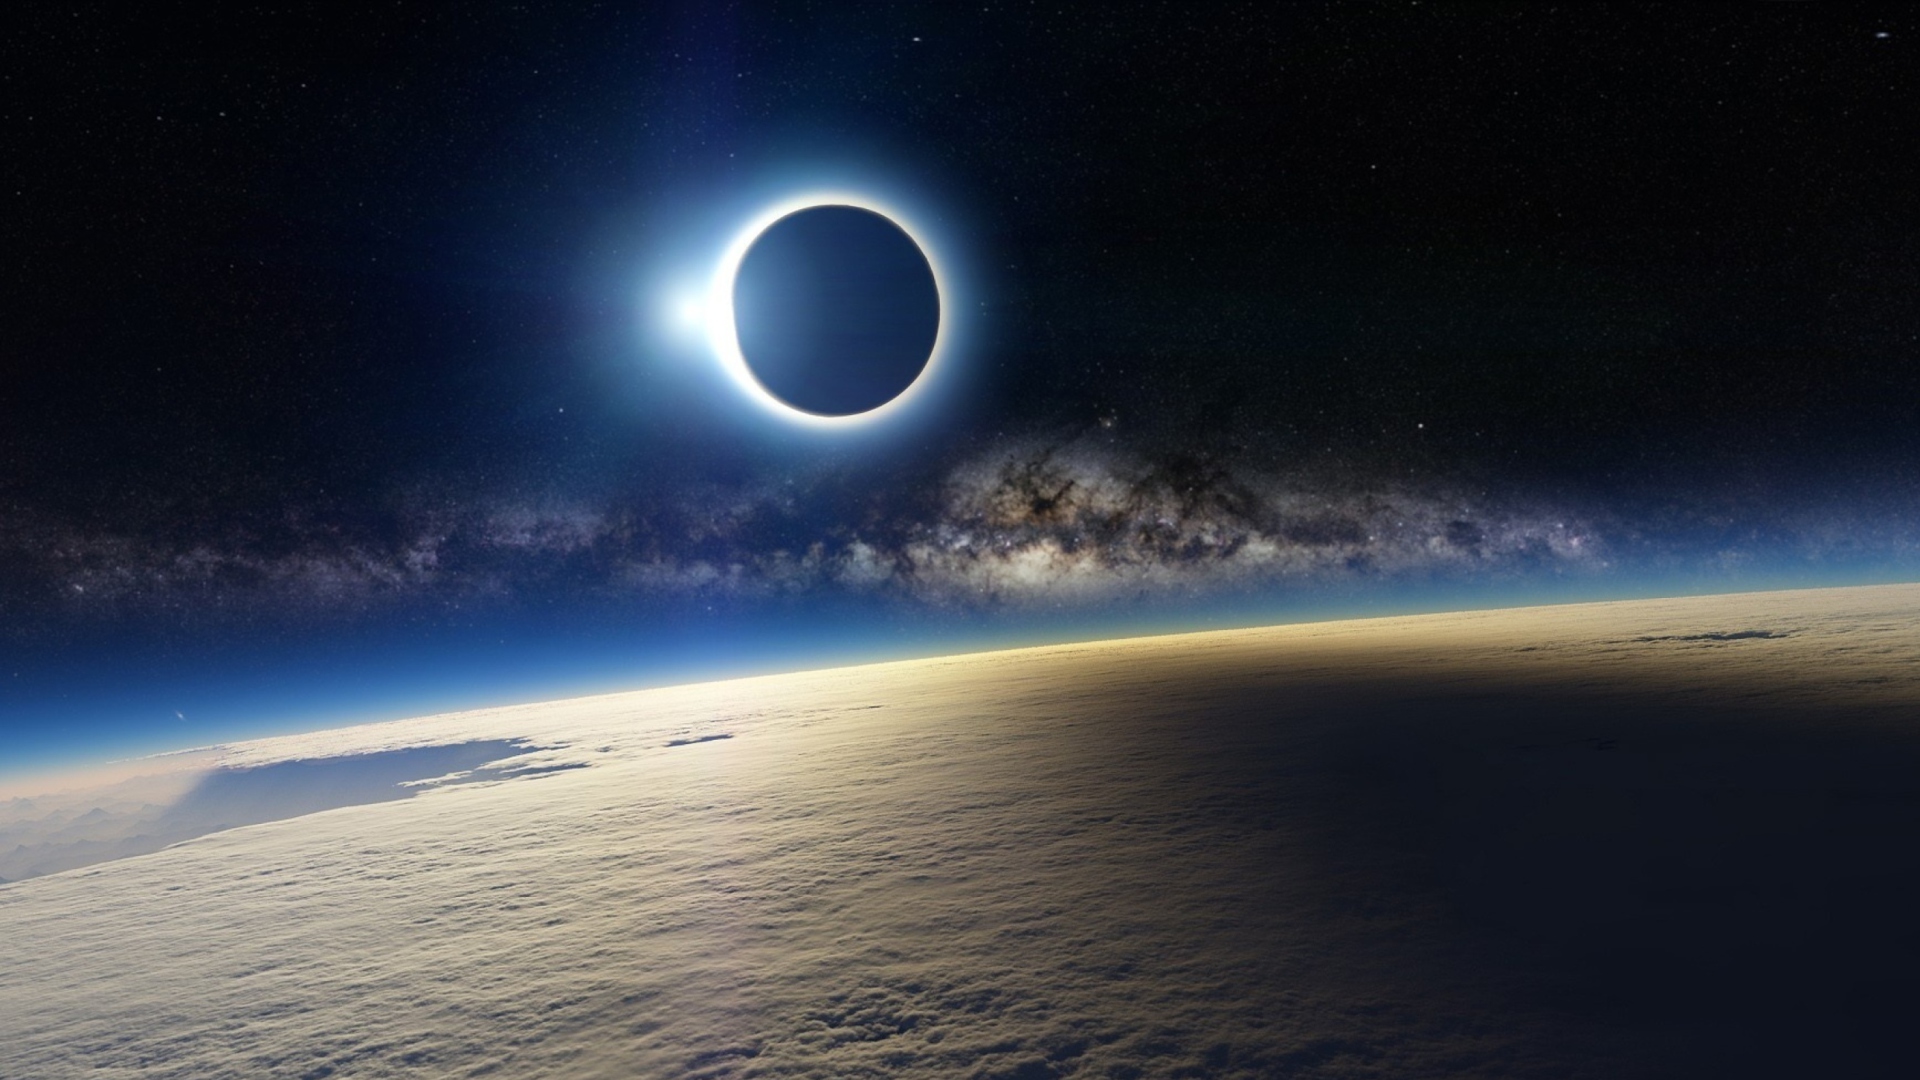 Eclipse From Space screenshot #1 1920x1080